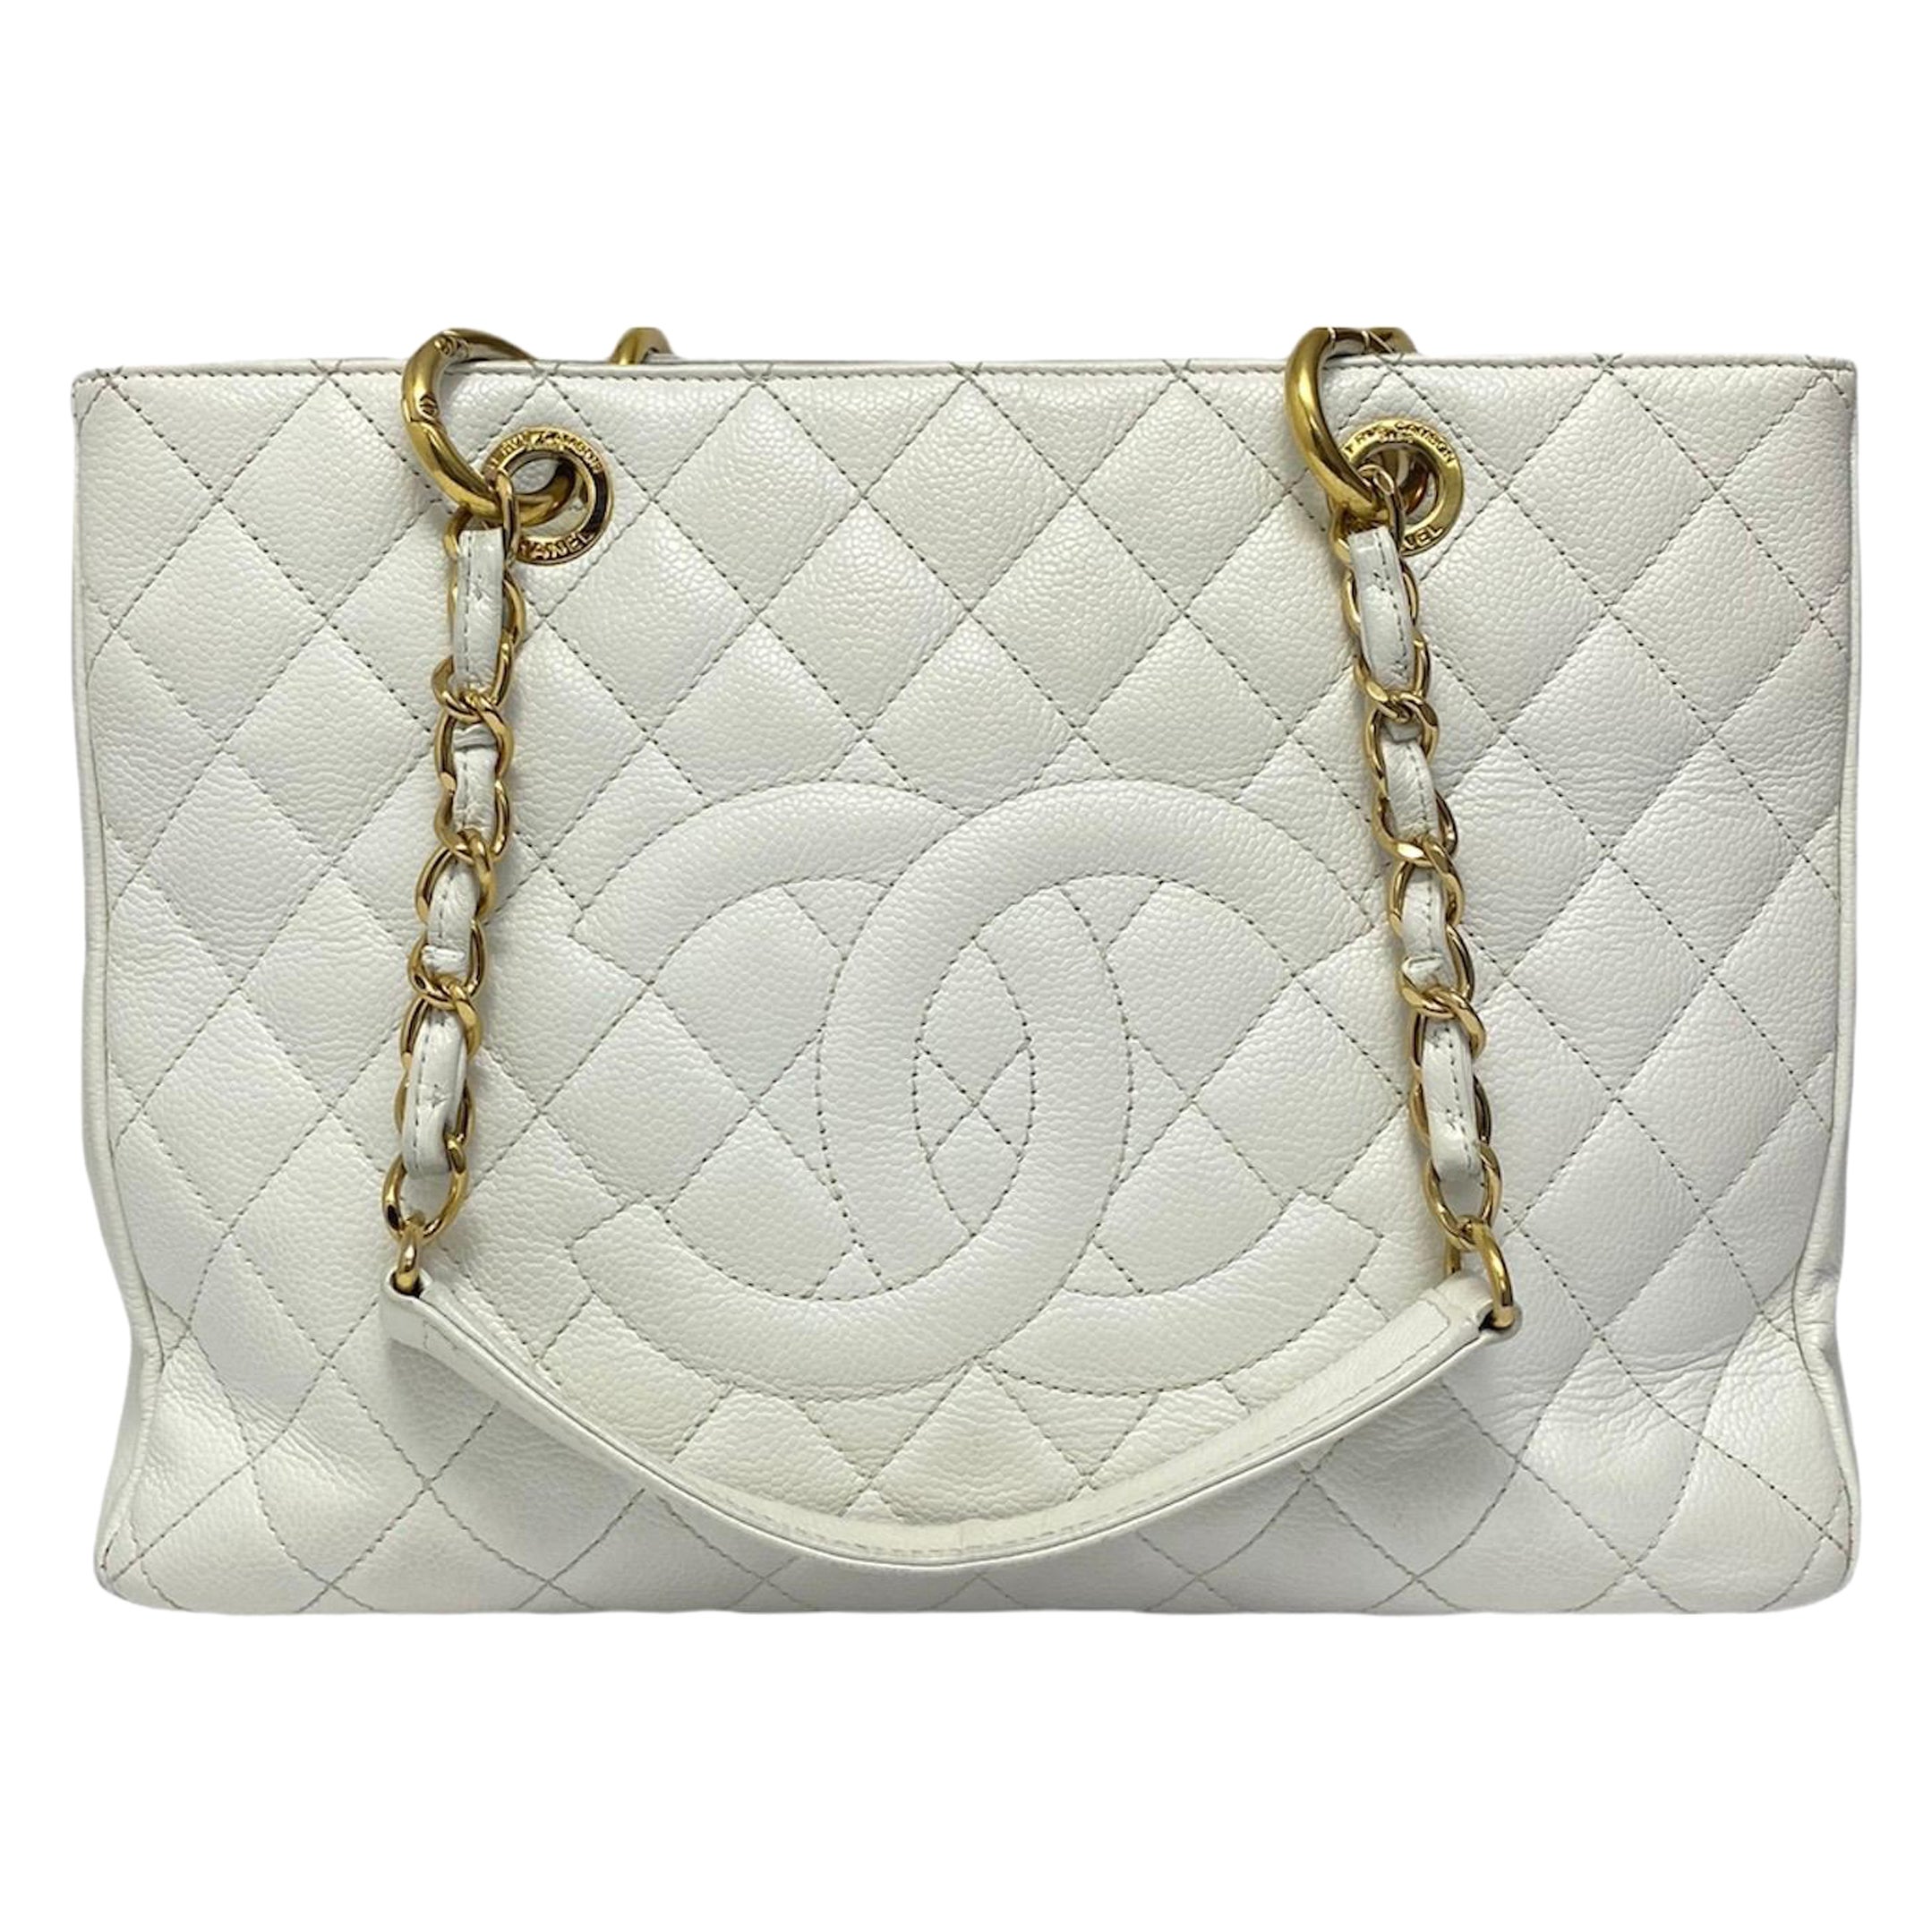 2011 Chanel White Leather GST Bag at 1stDibs